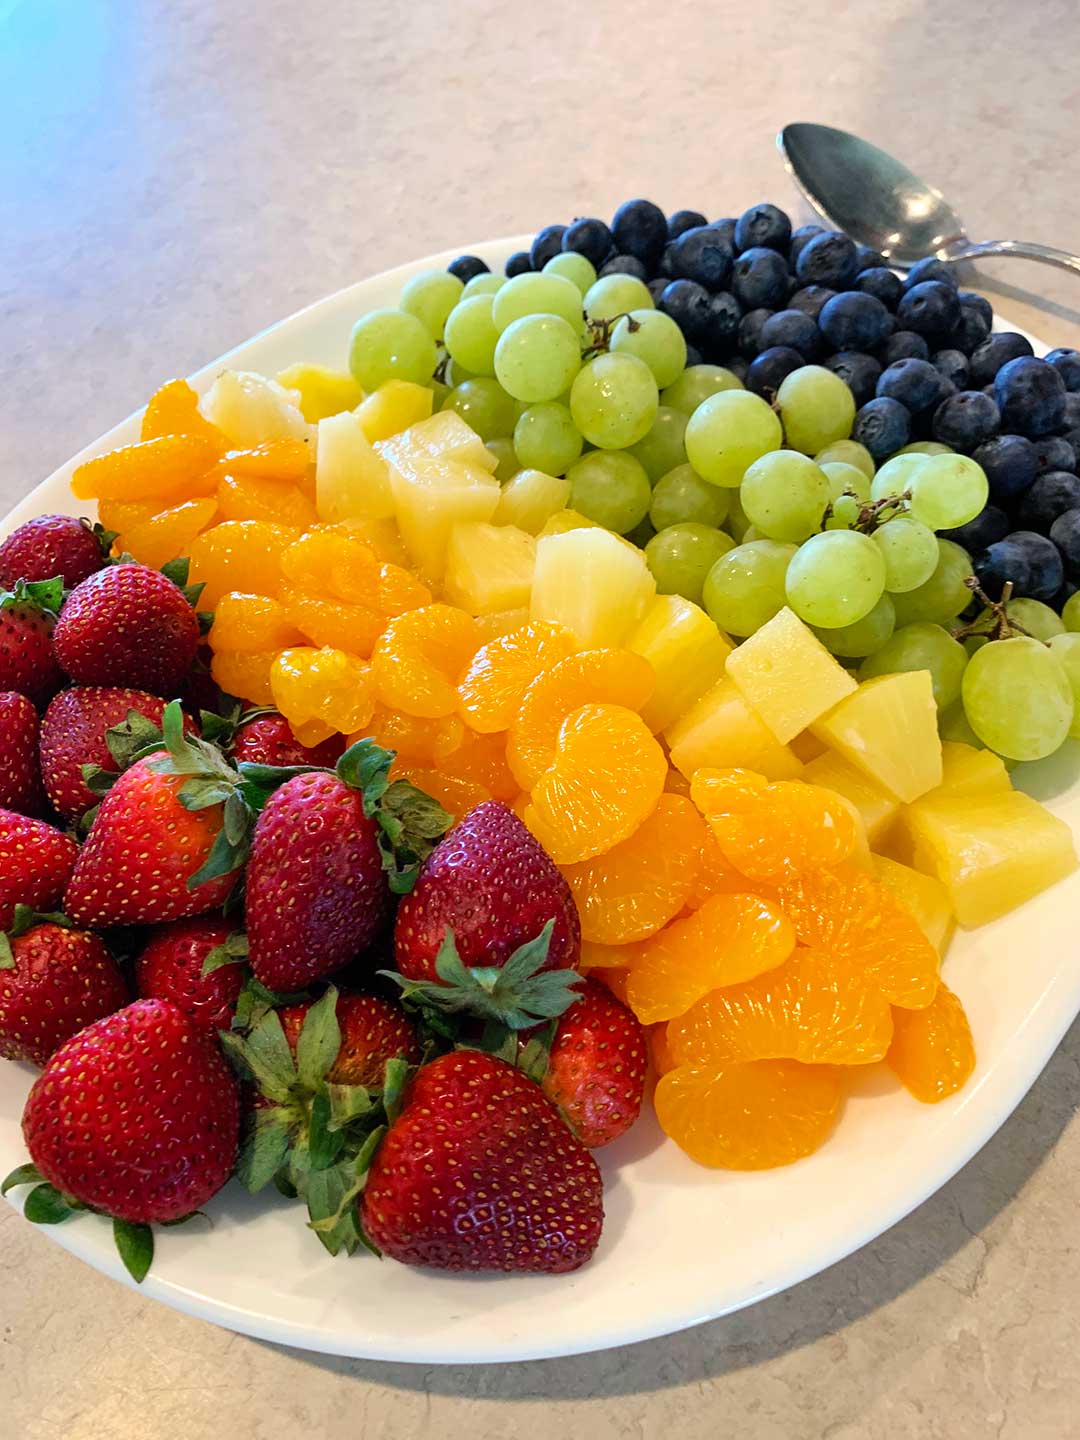 A platter of rainbow fruit with strawberries, oranges, pineapple, green grapes, and blueberries.